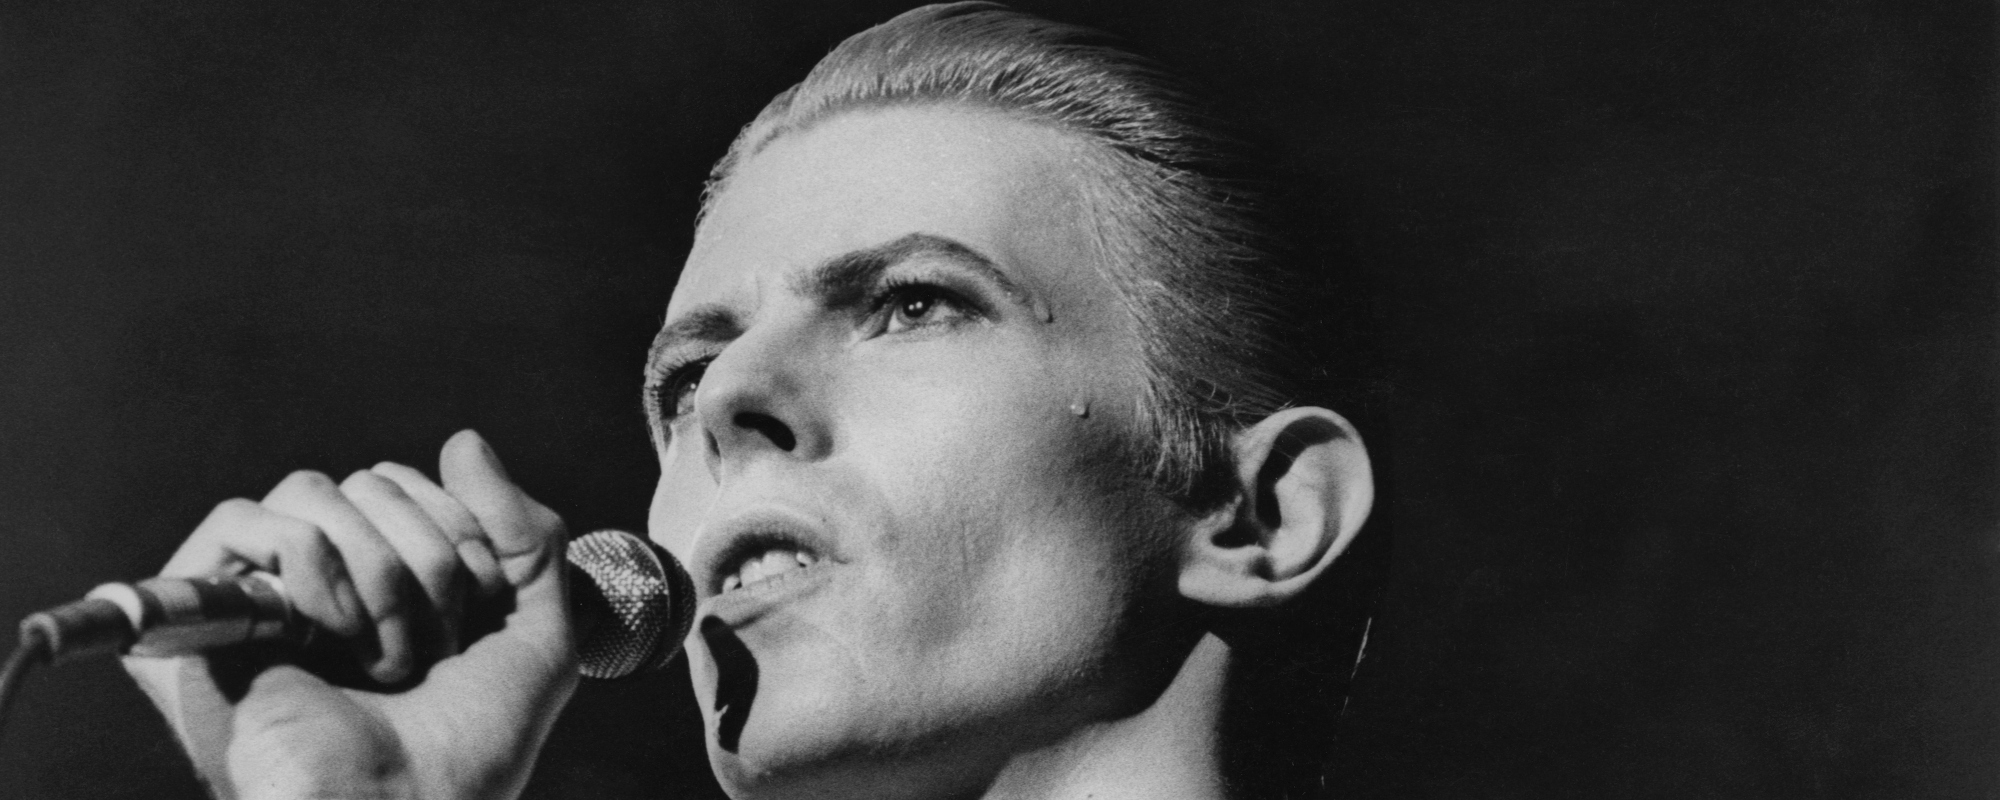 The Meaning Behind “Golden Years” by David Bowie and the Rise of The Thin White Duke